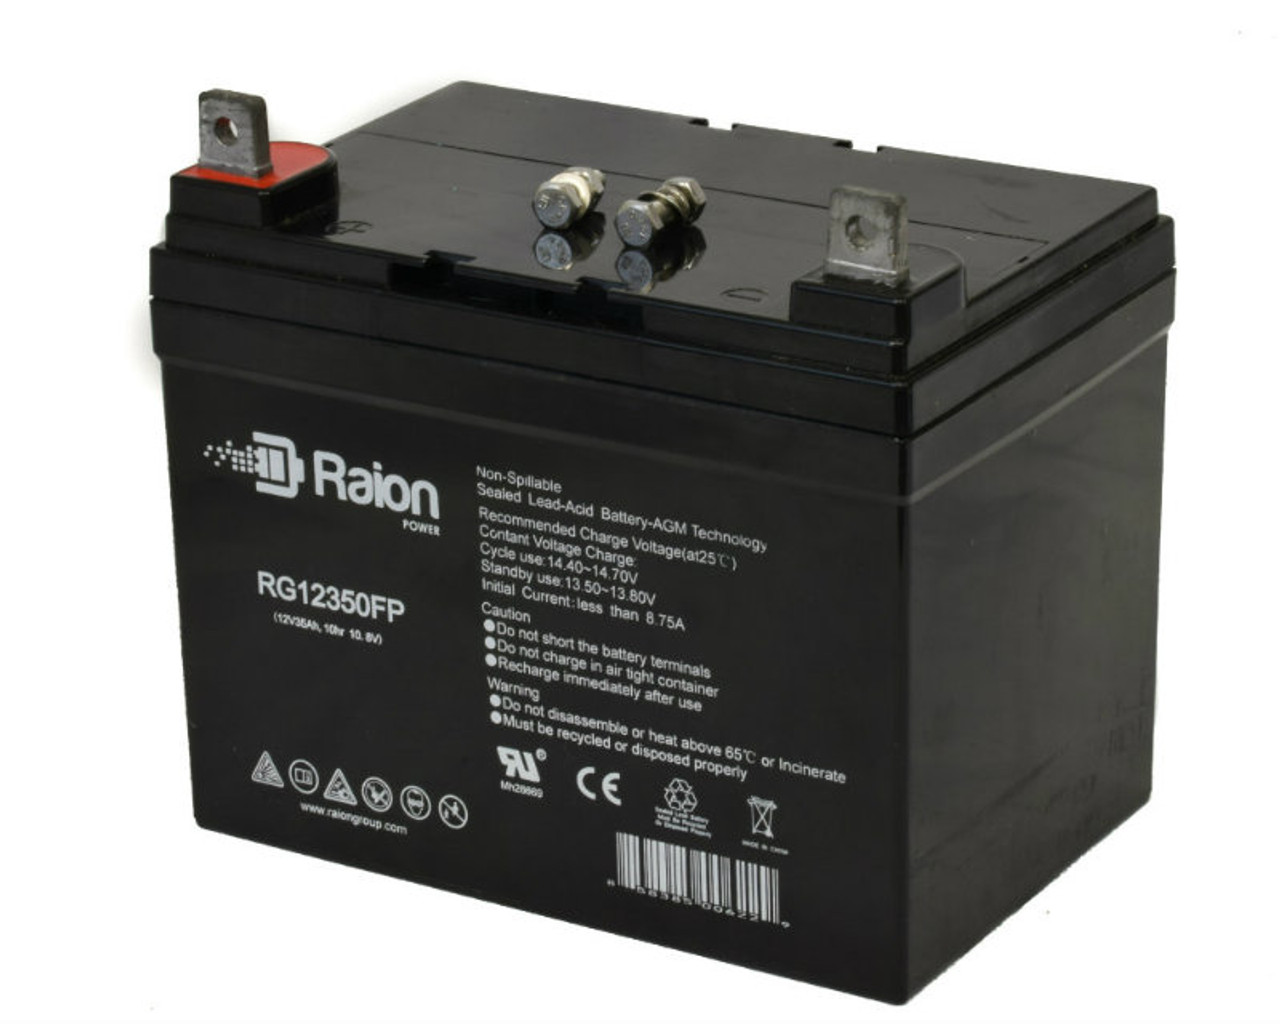 Raion Power Replacement 12V 35Ah RG12350FP Battery for Ingersol Equipment 110